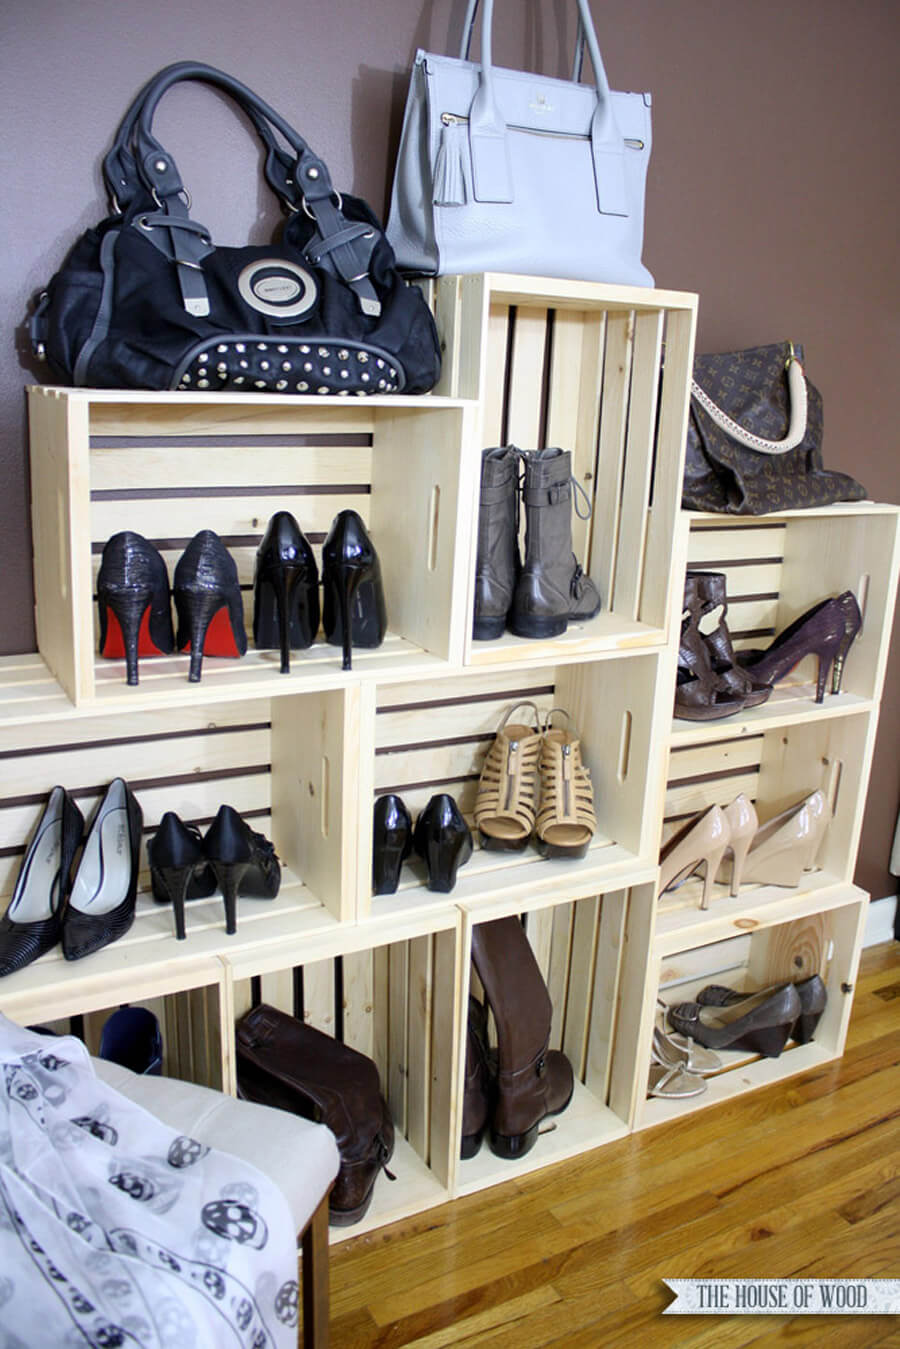 Customized Wooden Shoe Rack Built from Scratch